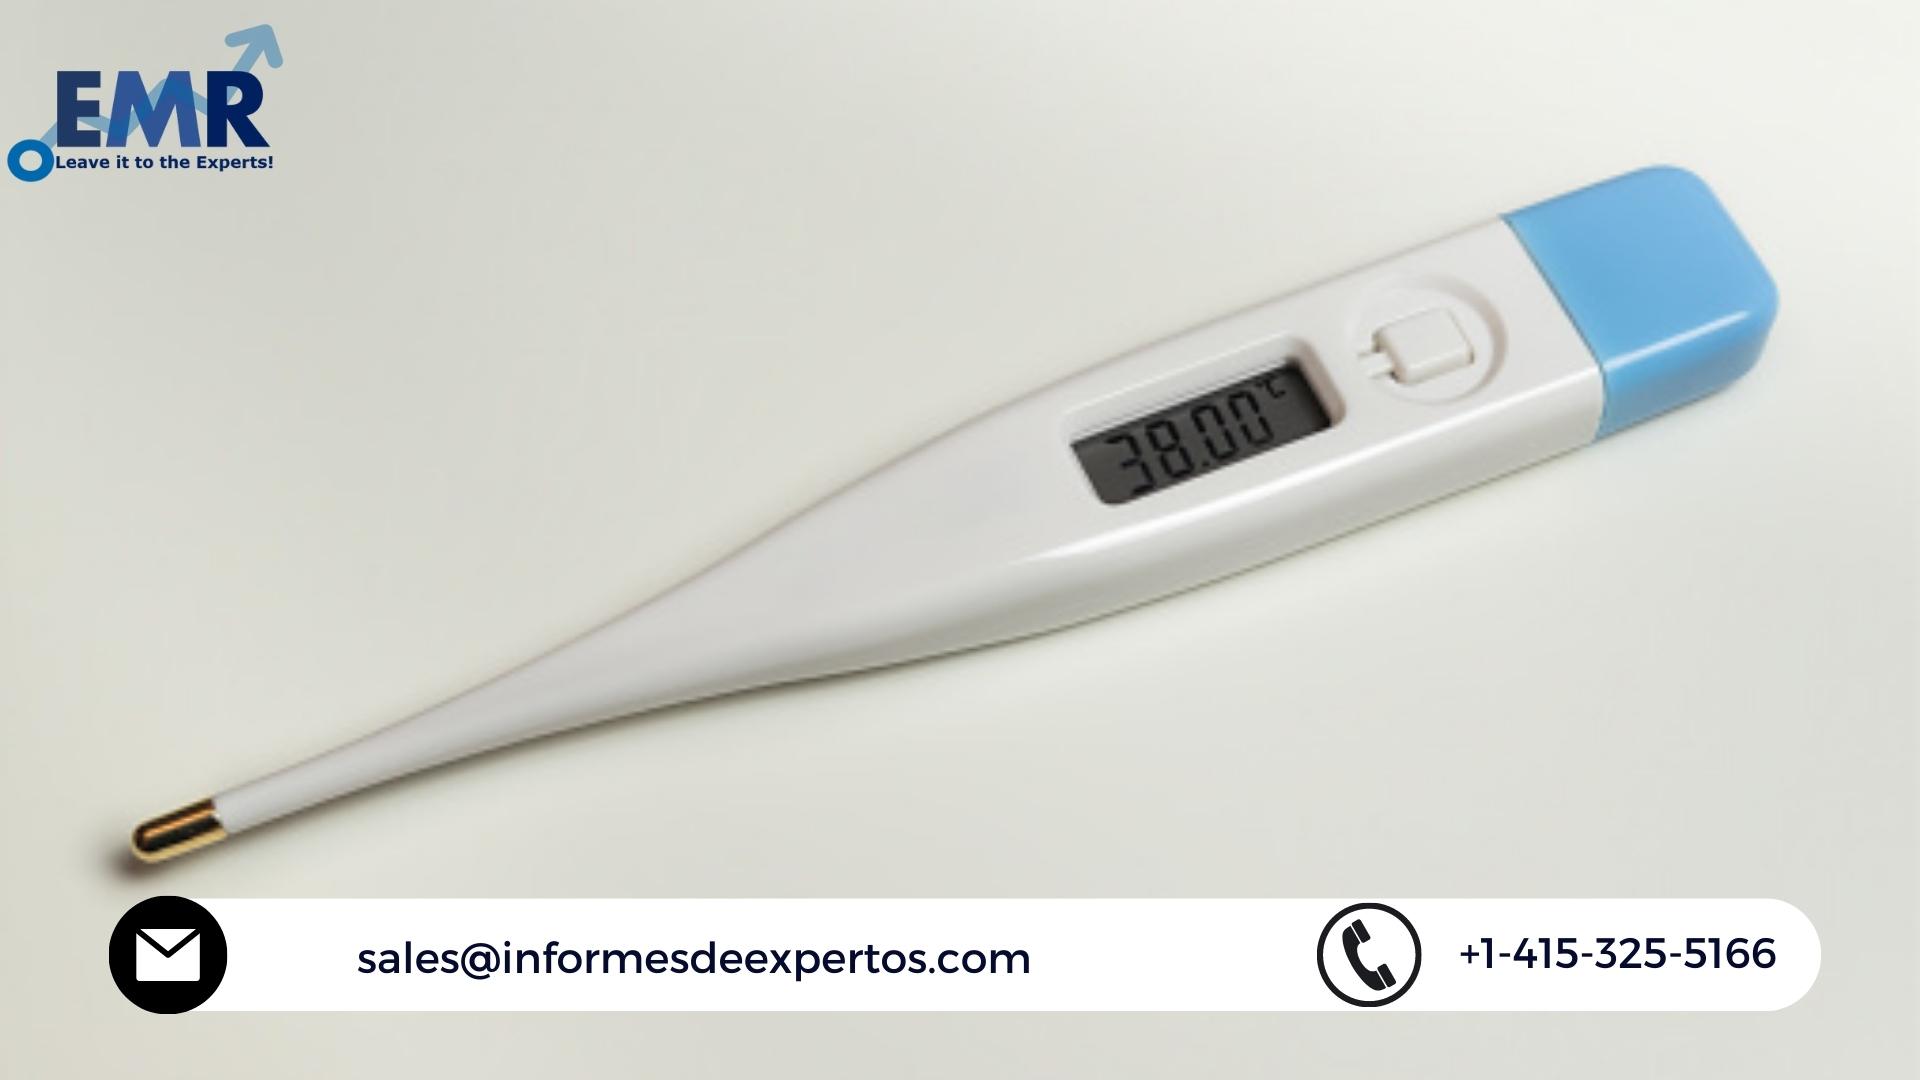 Disposable Thermometers Market